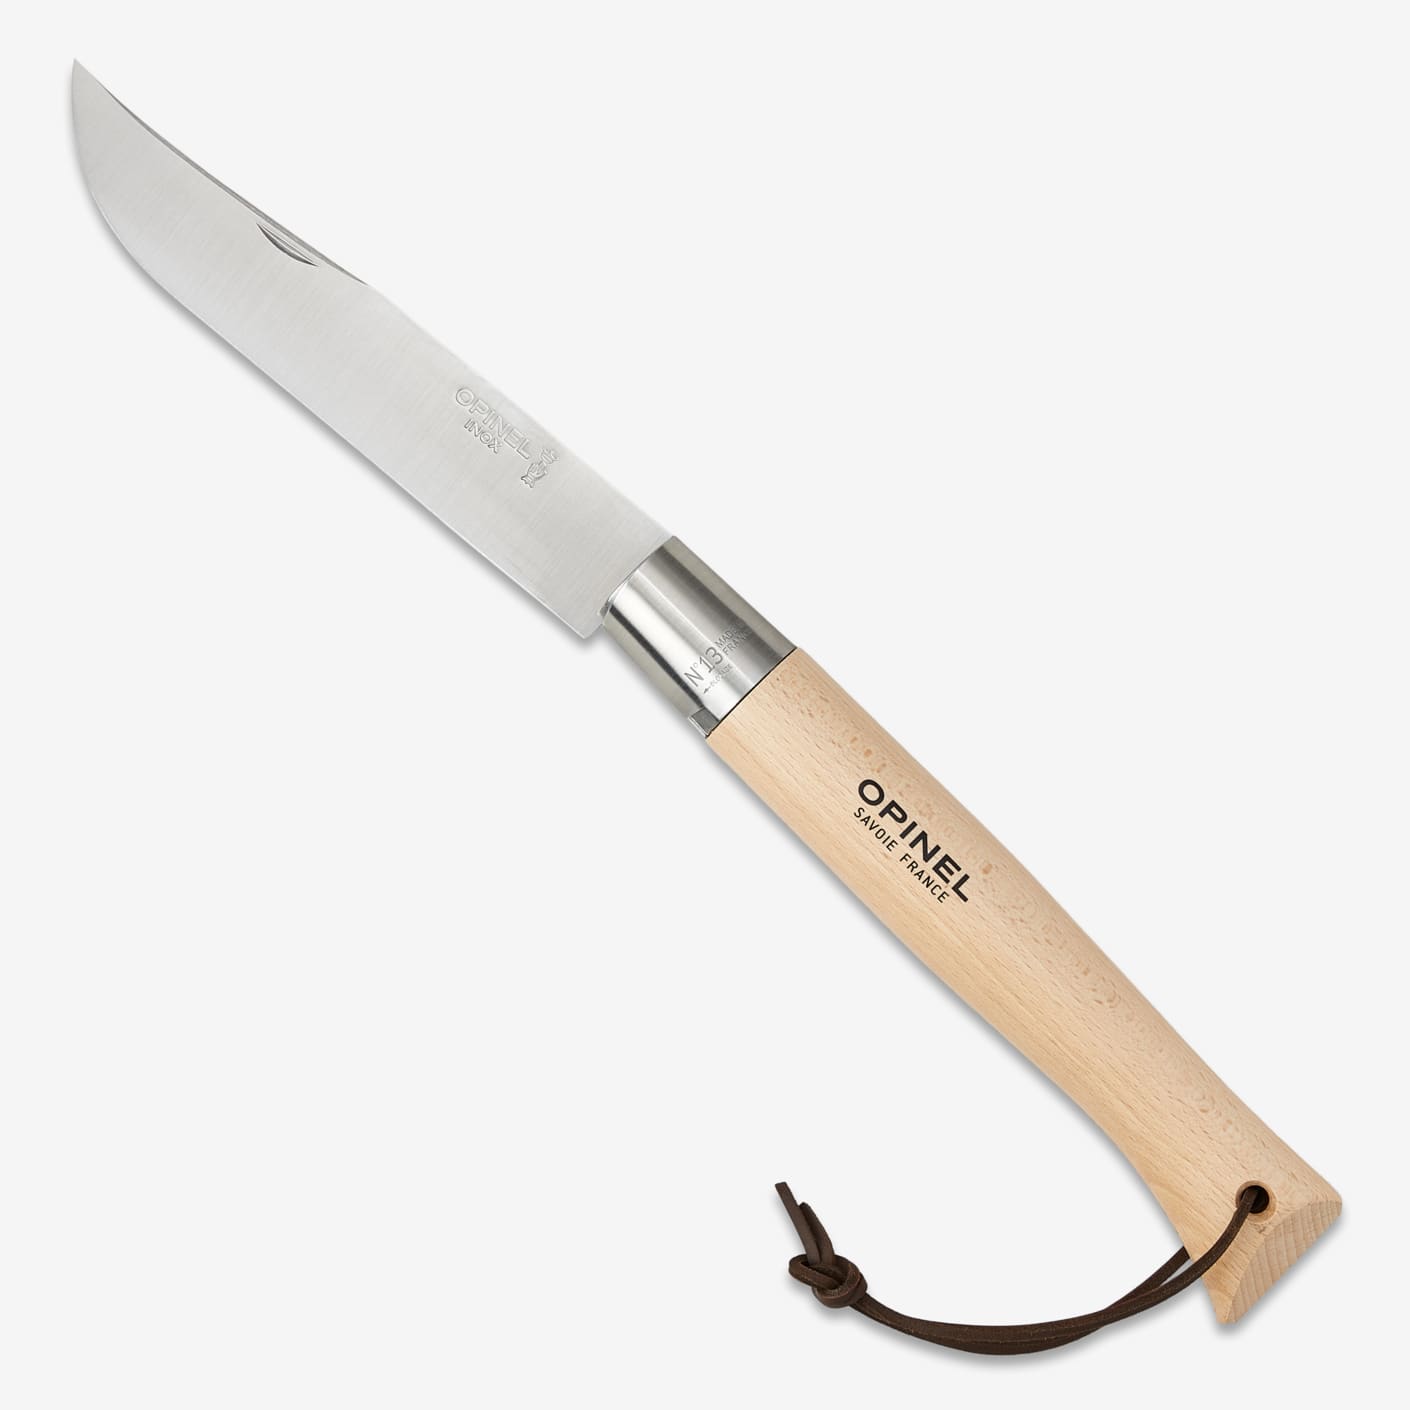 https://dam.bespokepost.com/image/upload/c_limit,dpr_auto,f_auto,q_auto,w_1410/v1/Storefront/2022%20/09-September/in-house/opinel-no.13-giant-stainless-steel-folding-knife_1